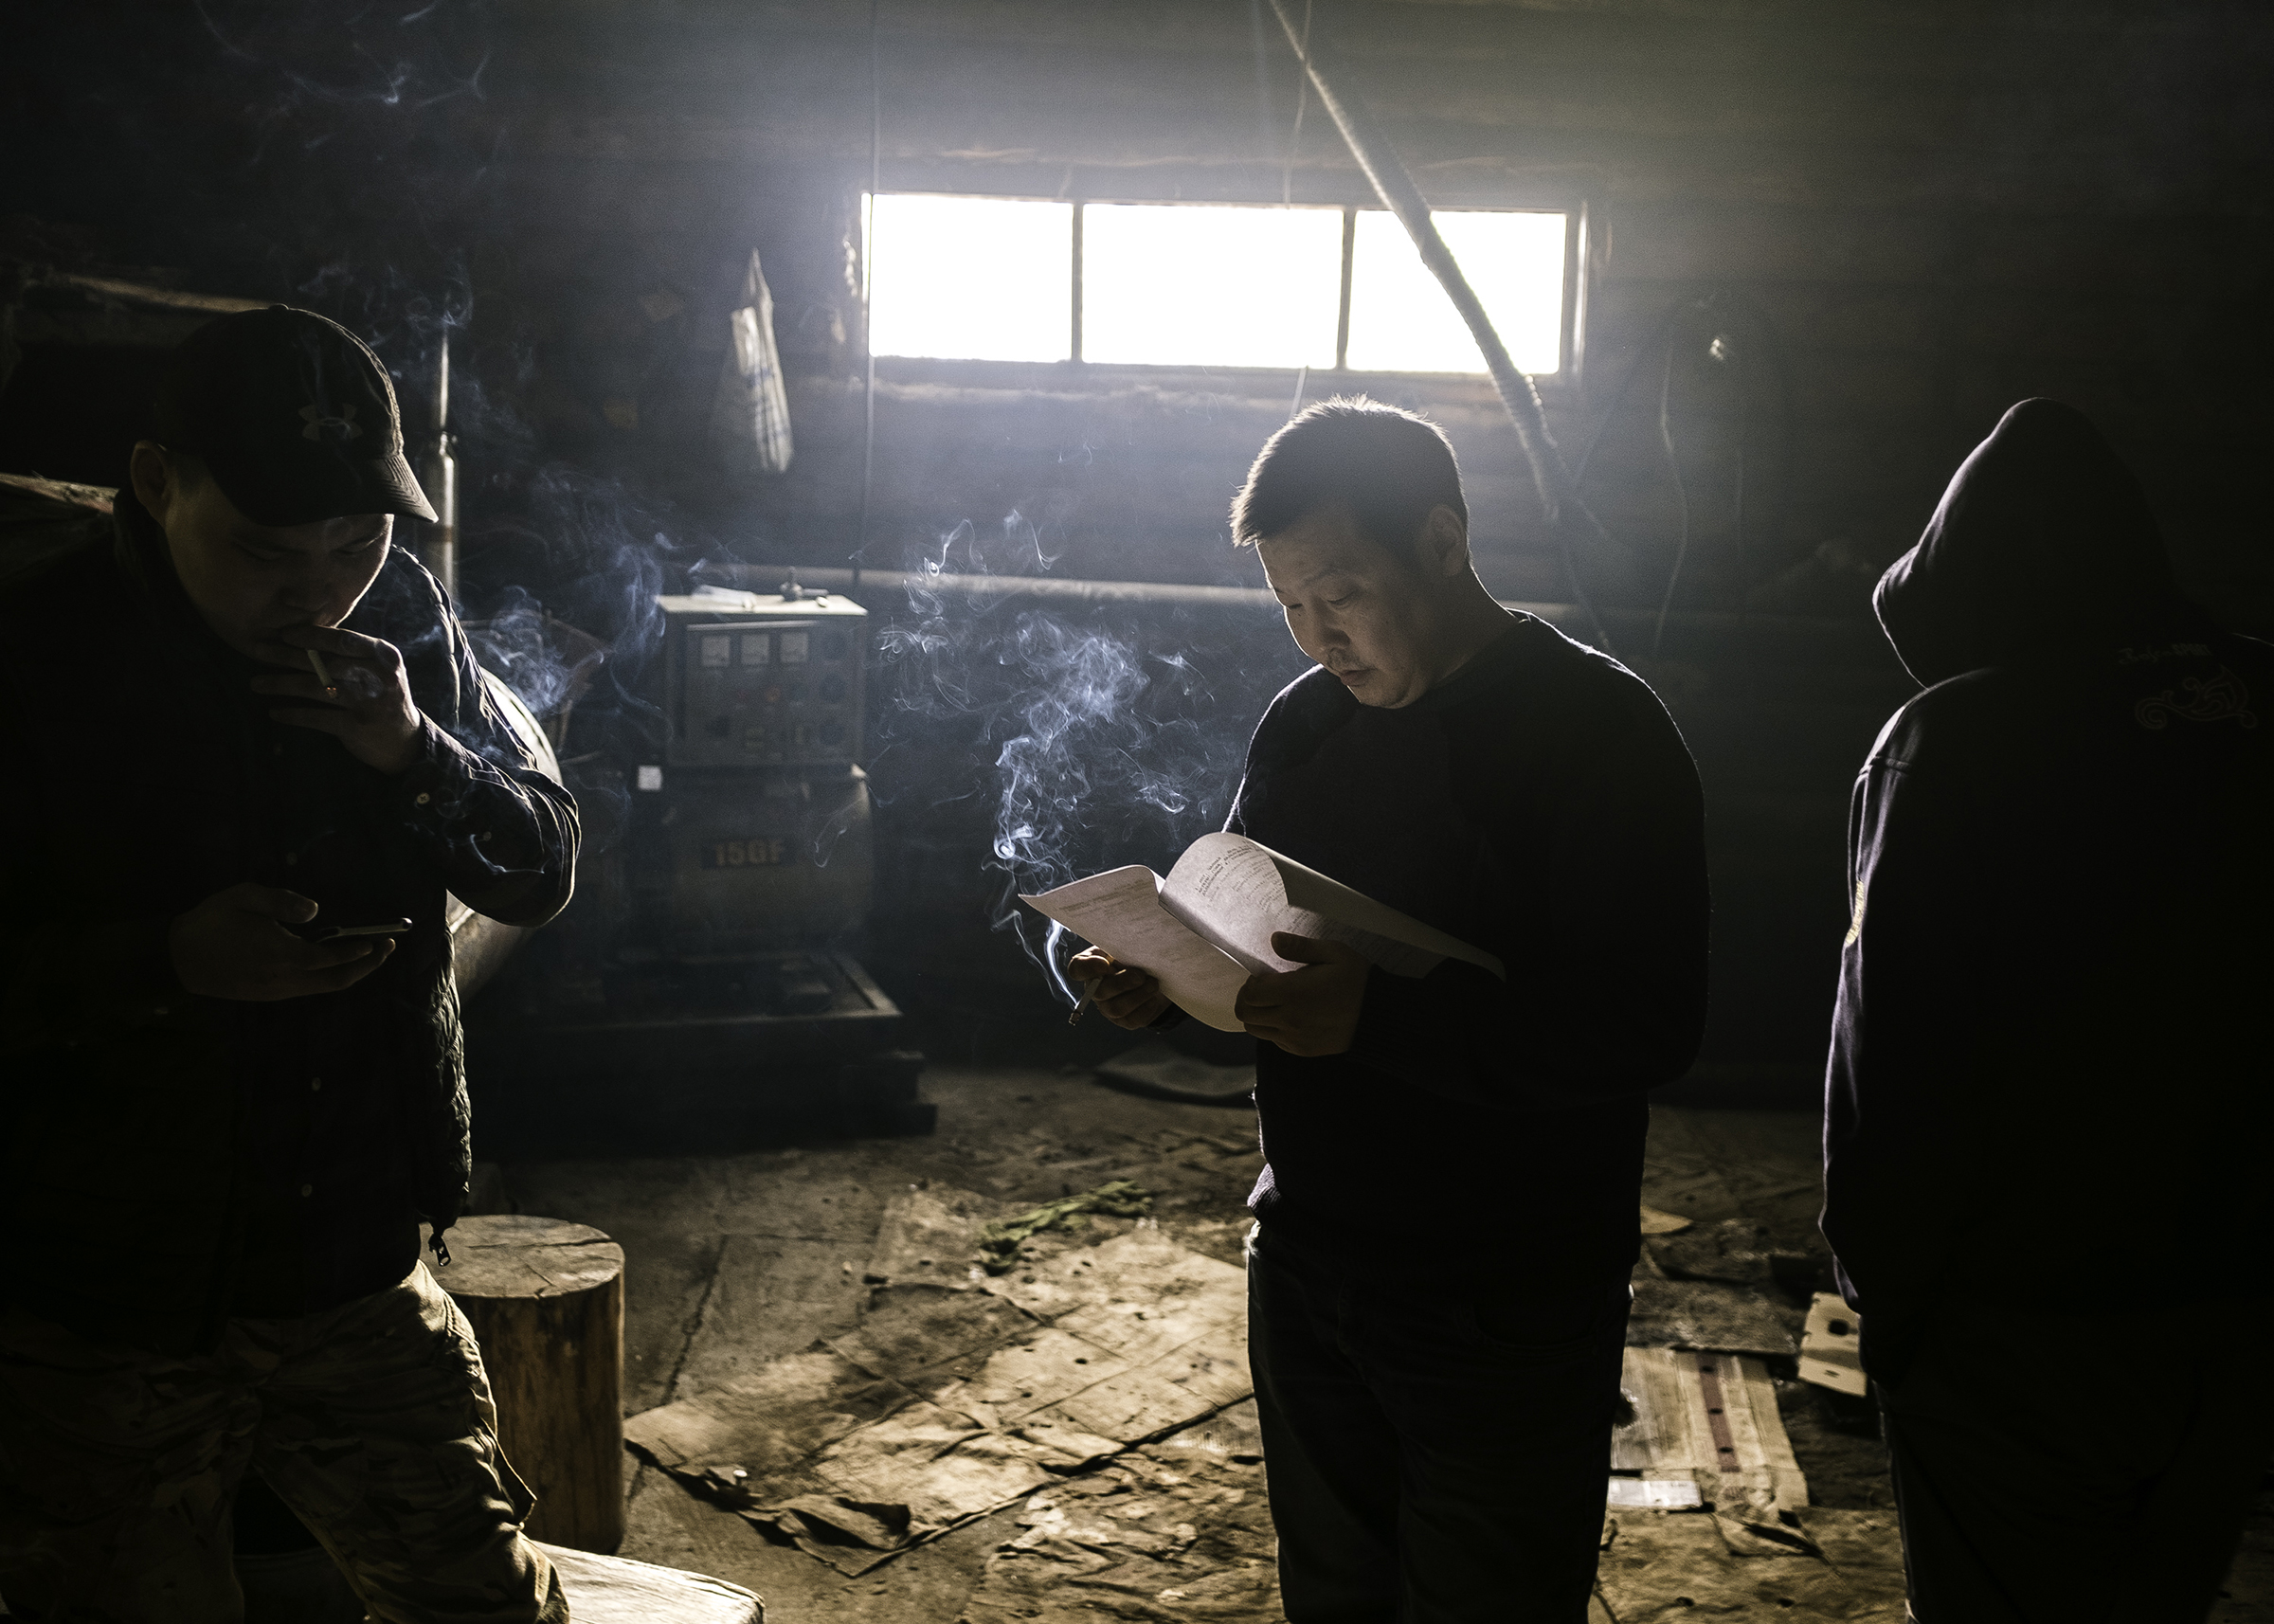 Actors playing the role of truckers in the drama "Khara Khaar" (Black Snow) rehearse their parts in the smoking room of a roadside cafe, where the scene takes place. (Alexey Vasilyev)